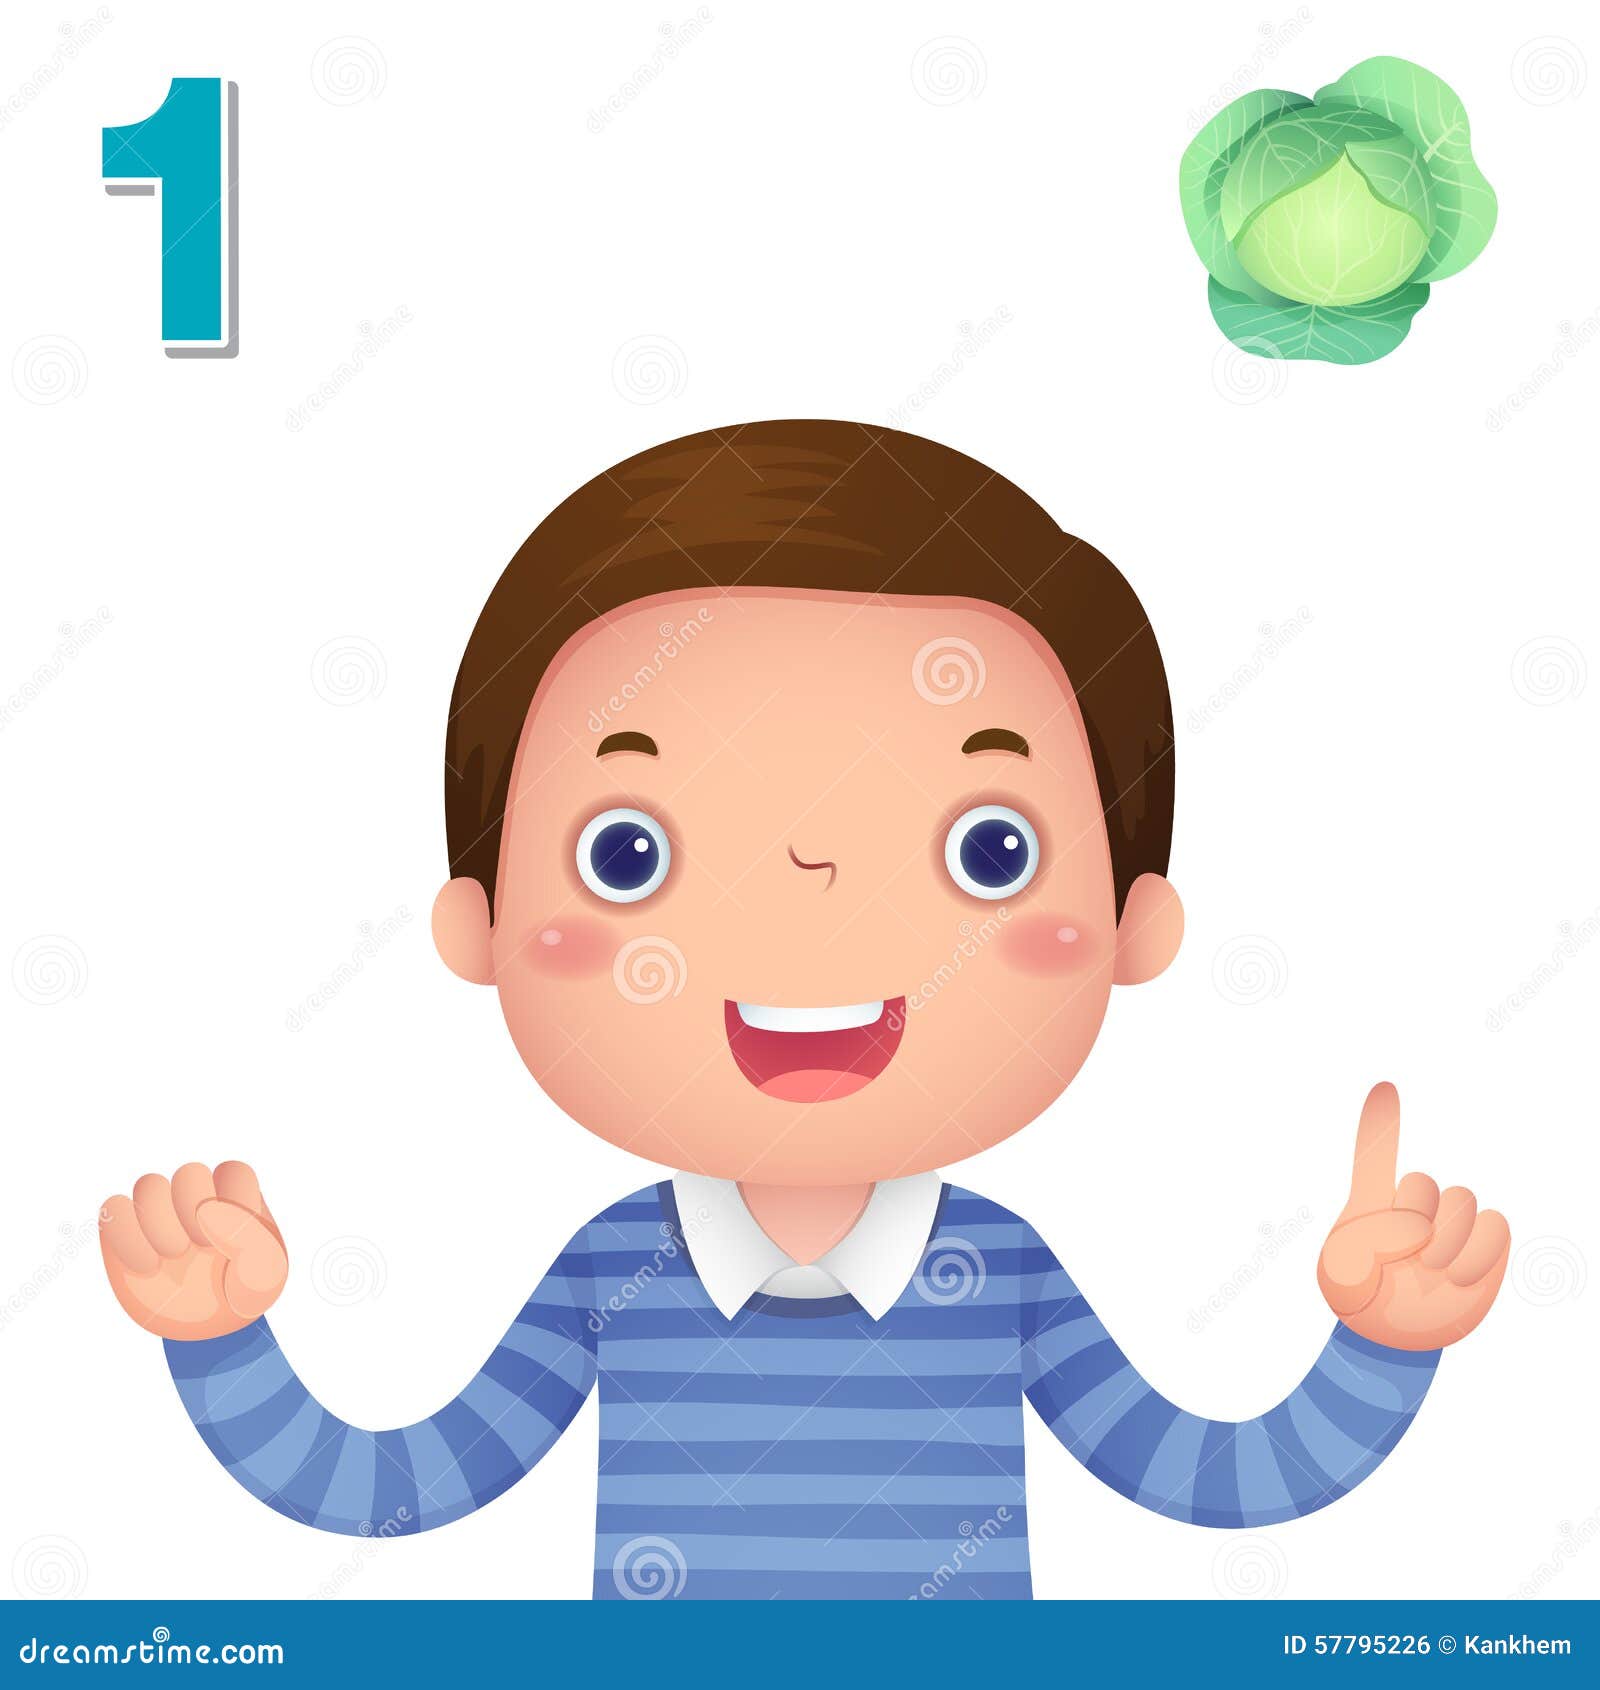 learn number and counting with kidÃ¢â¬â¢s hand showing the number o